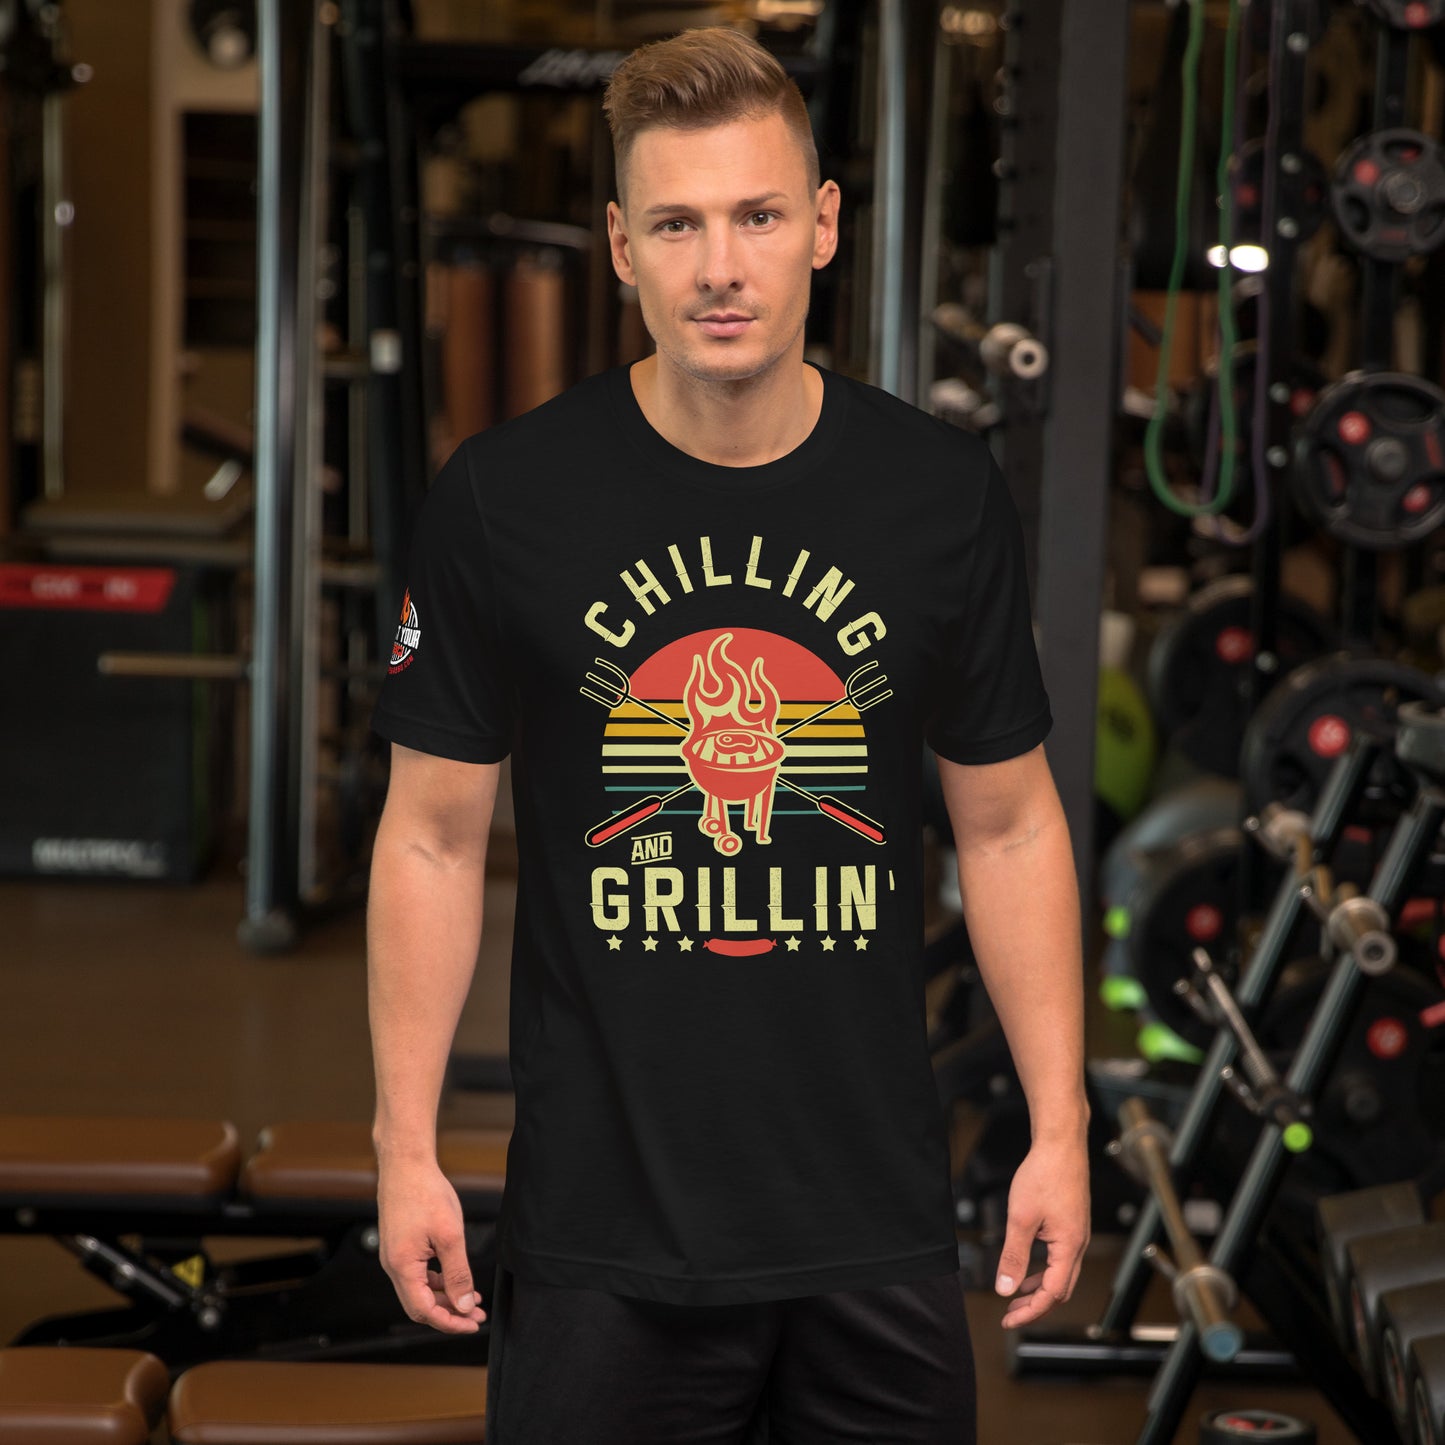 Chilling & Grillin' T-shirt